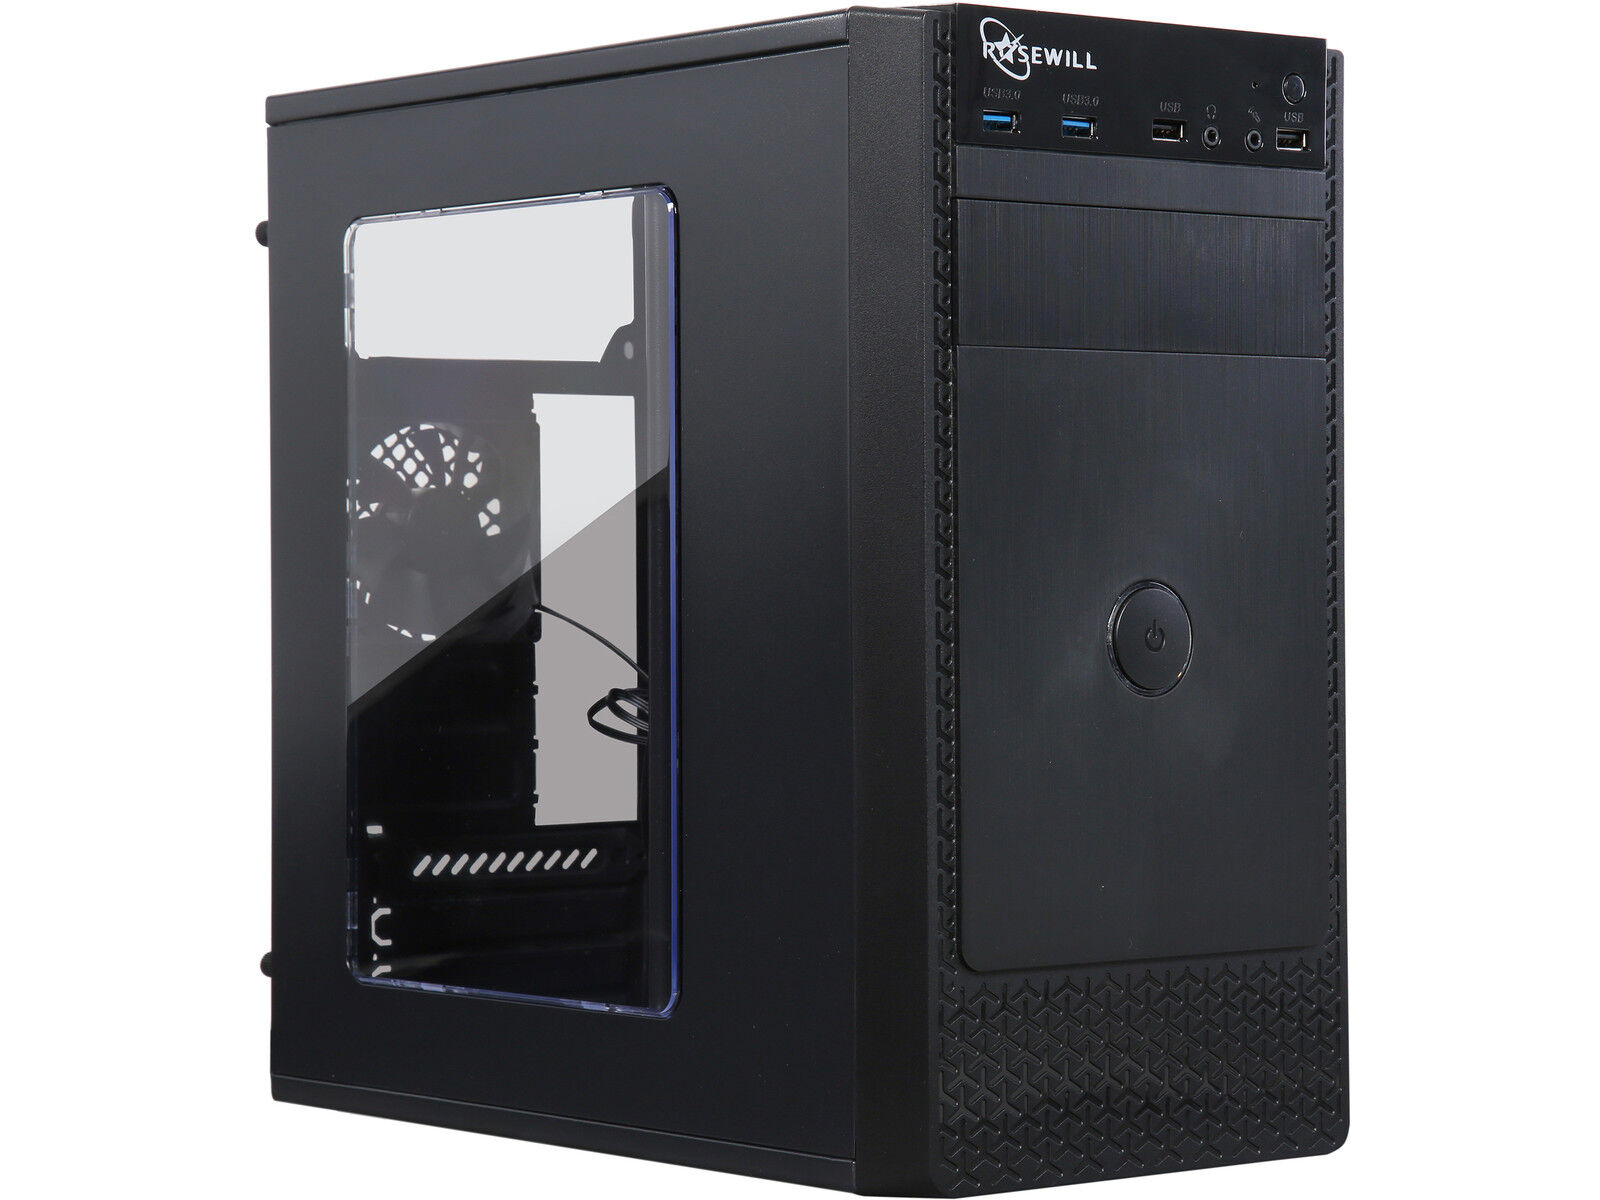 Rosewill Black Computer PC Case, ATX Mini Tower, Side Window and Two Fans FBM-X1